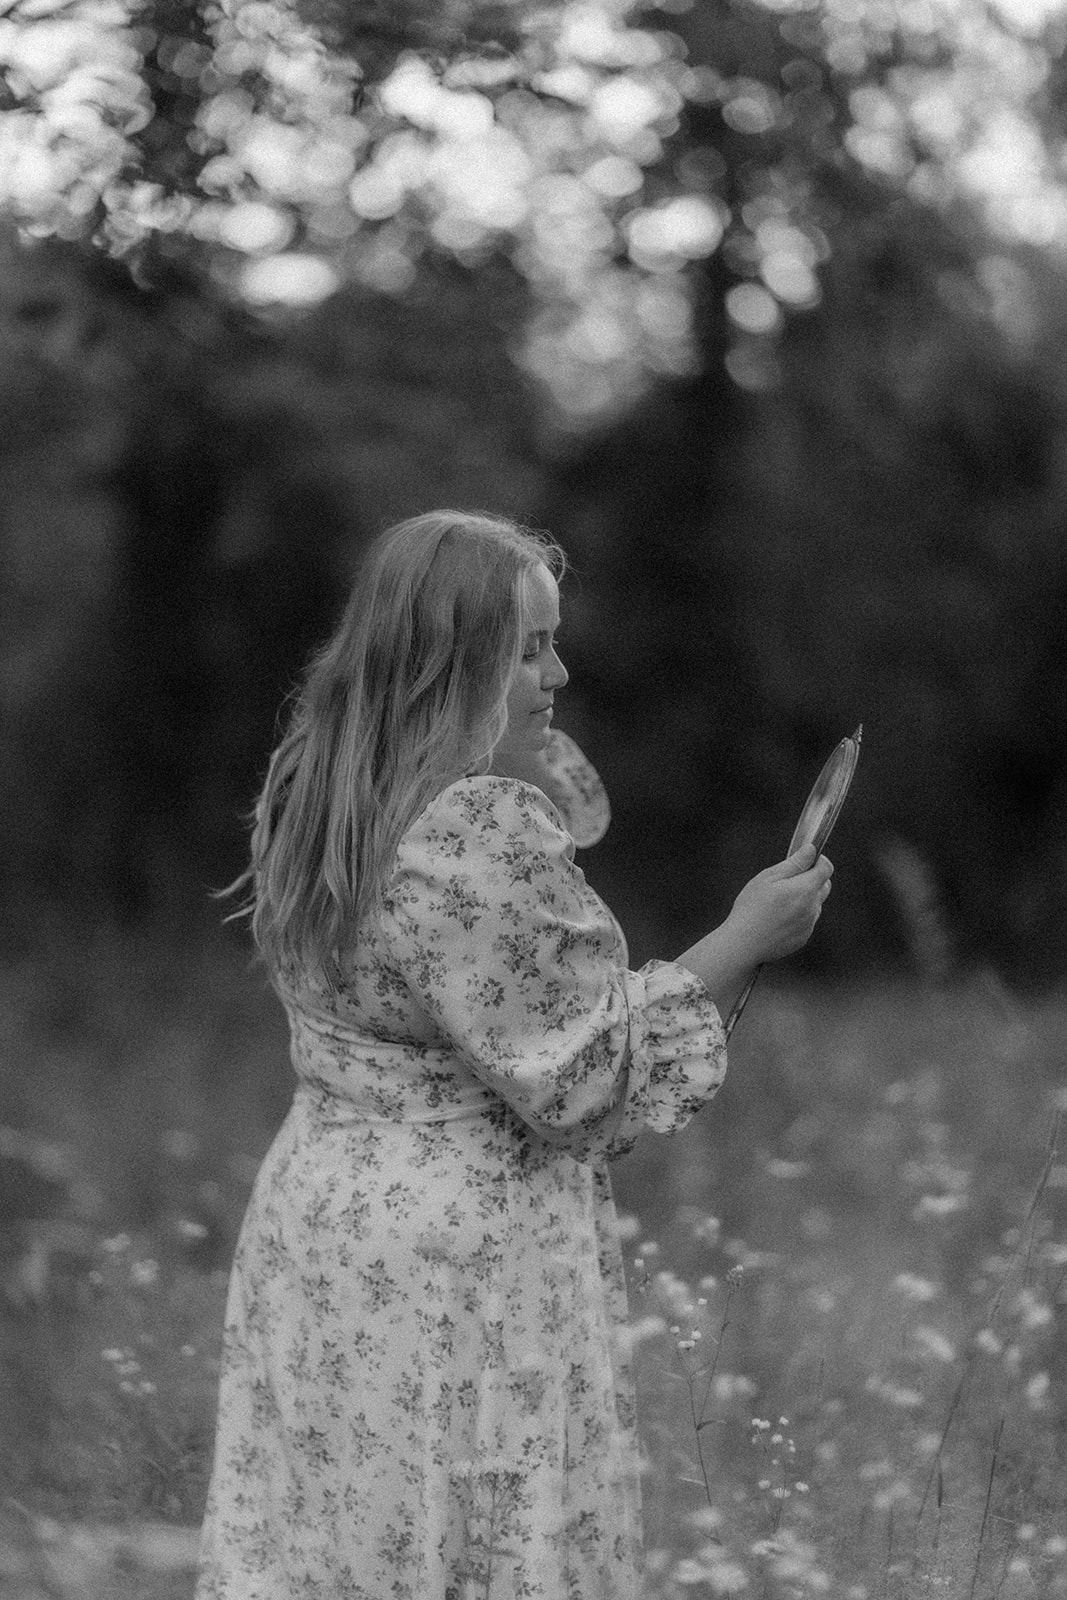 stunning young lady poses in field for her black and white creative self portrait photos